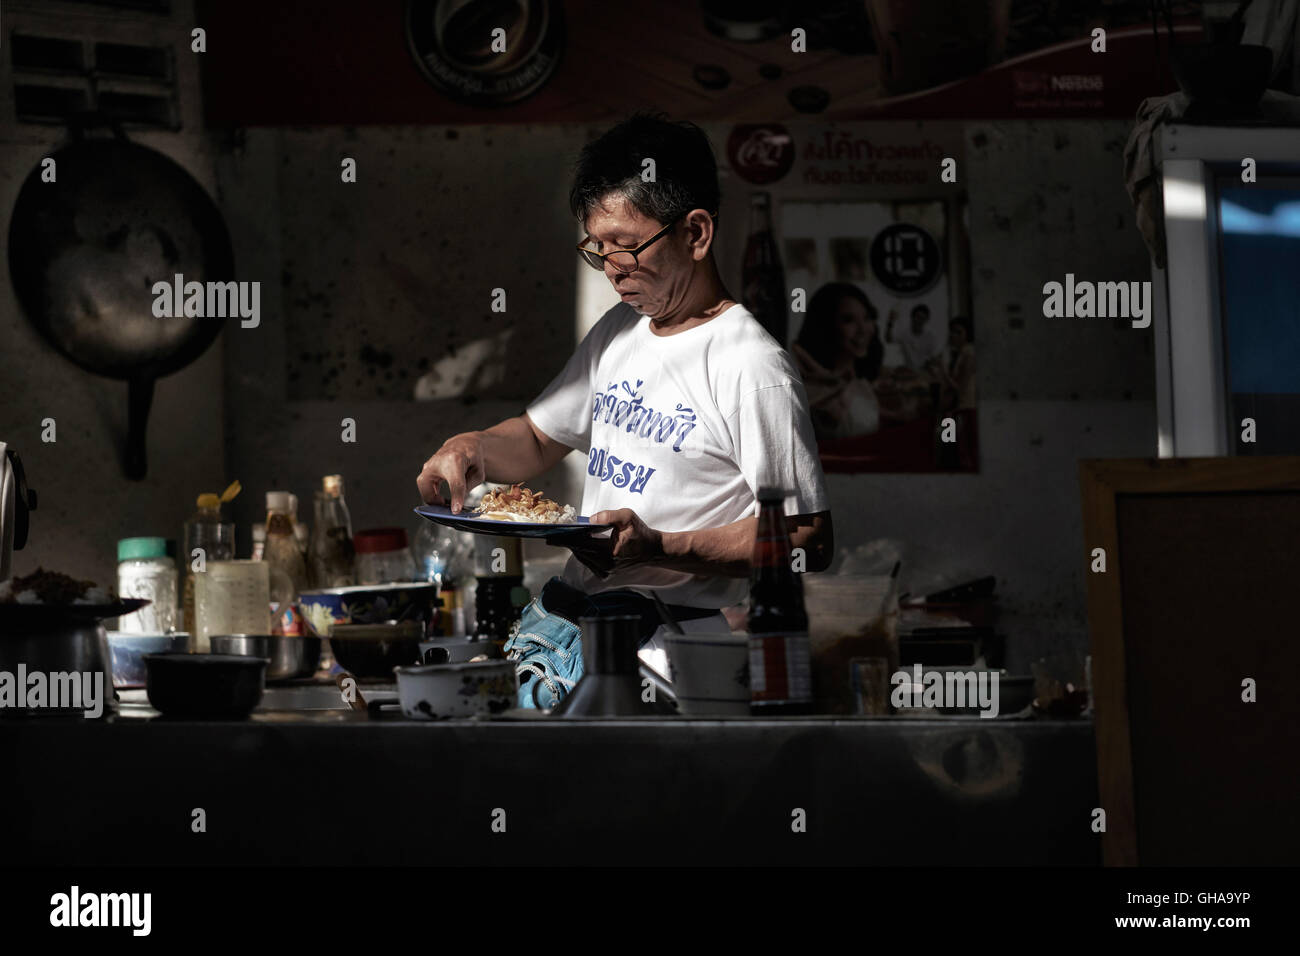 Chef cooking in the shadows at a back street alleyway cafe. Thailand S. E. Asia Stock Photo